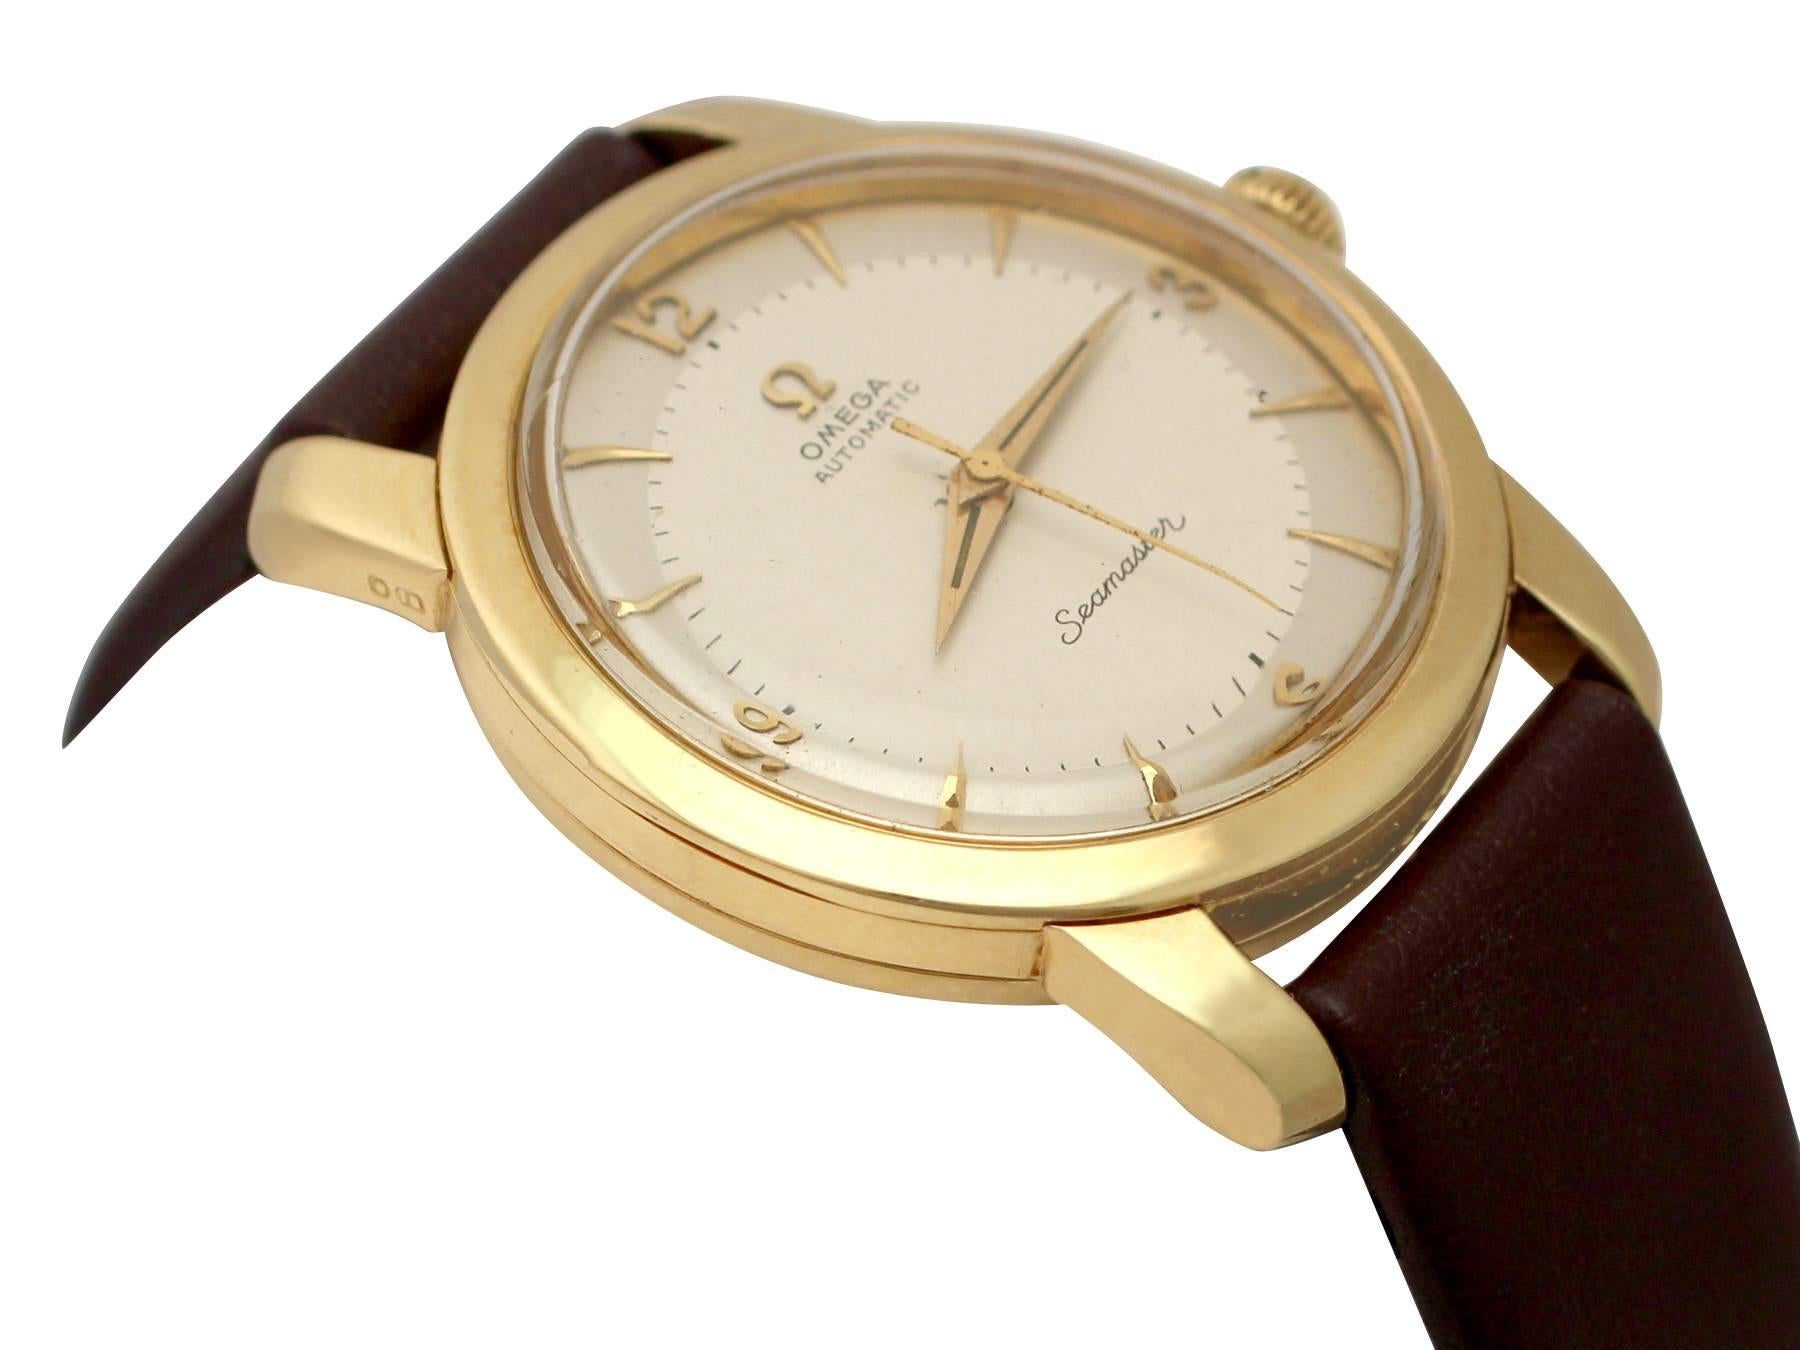 An impressive  automatic Omega Seamaster gents 18 karat yellow gold wrist watch; part of our watch collection.

This fine 1950s Omega Seamaster automatic watch has been crafted in 18k yellow gold.

The circular white dial displays gold colored 3,6,9